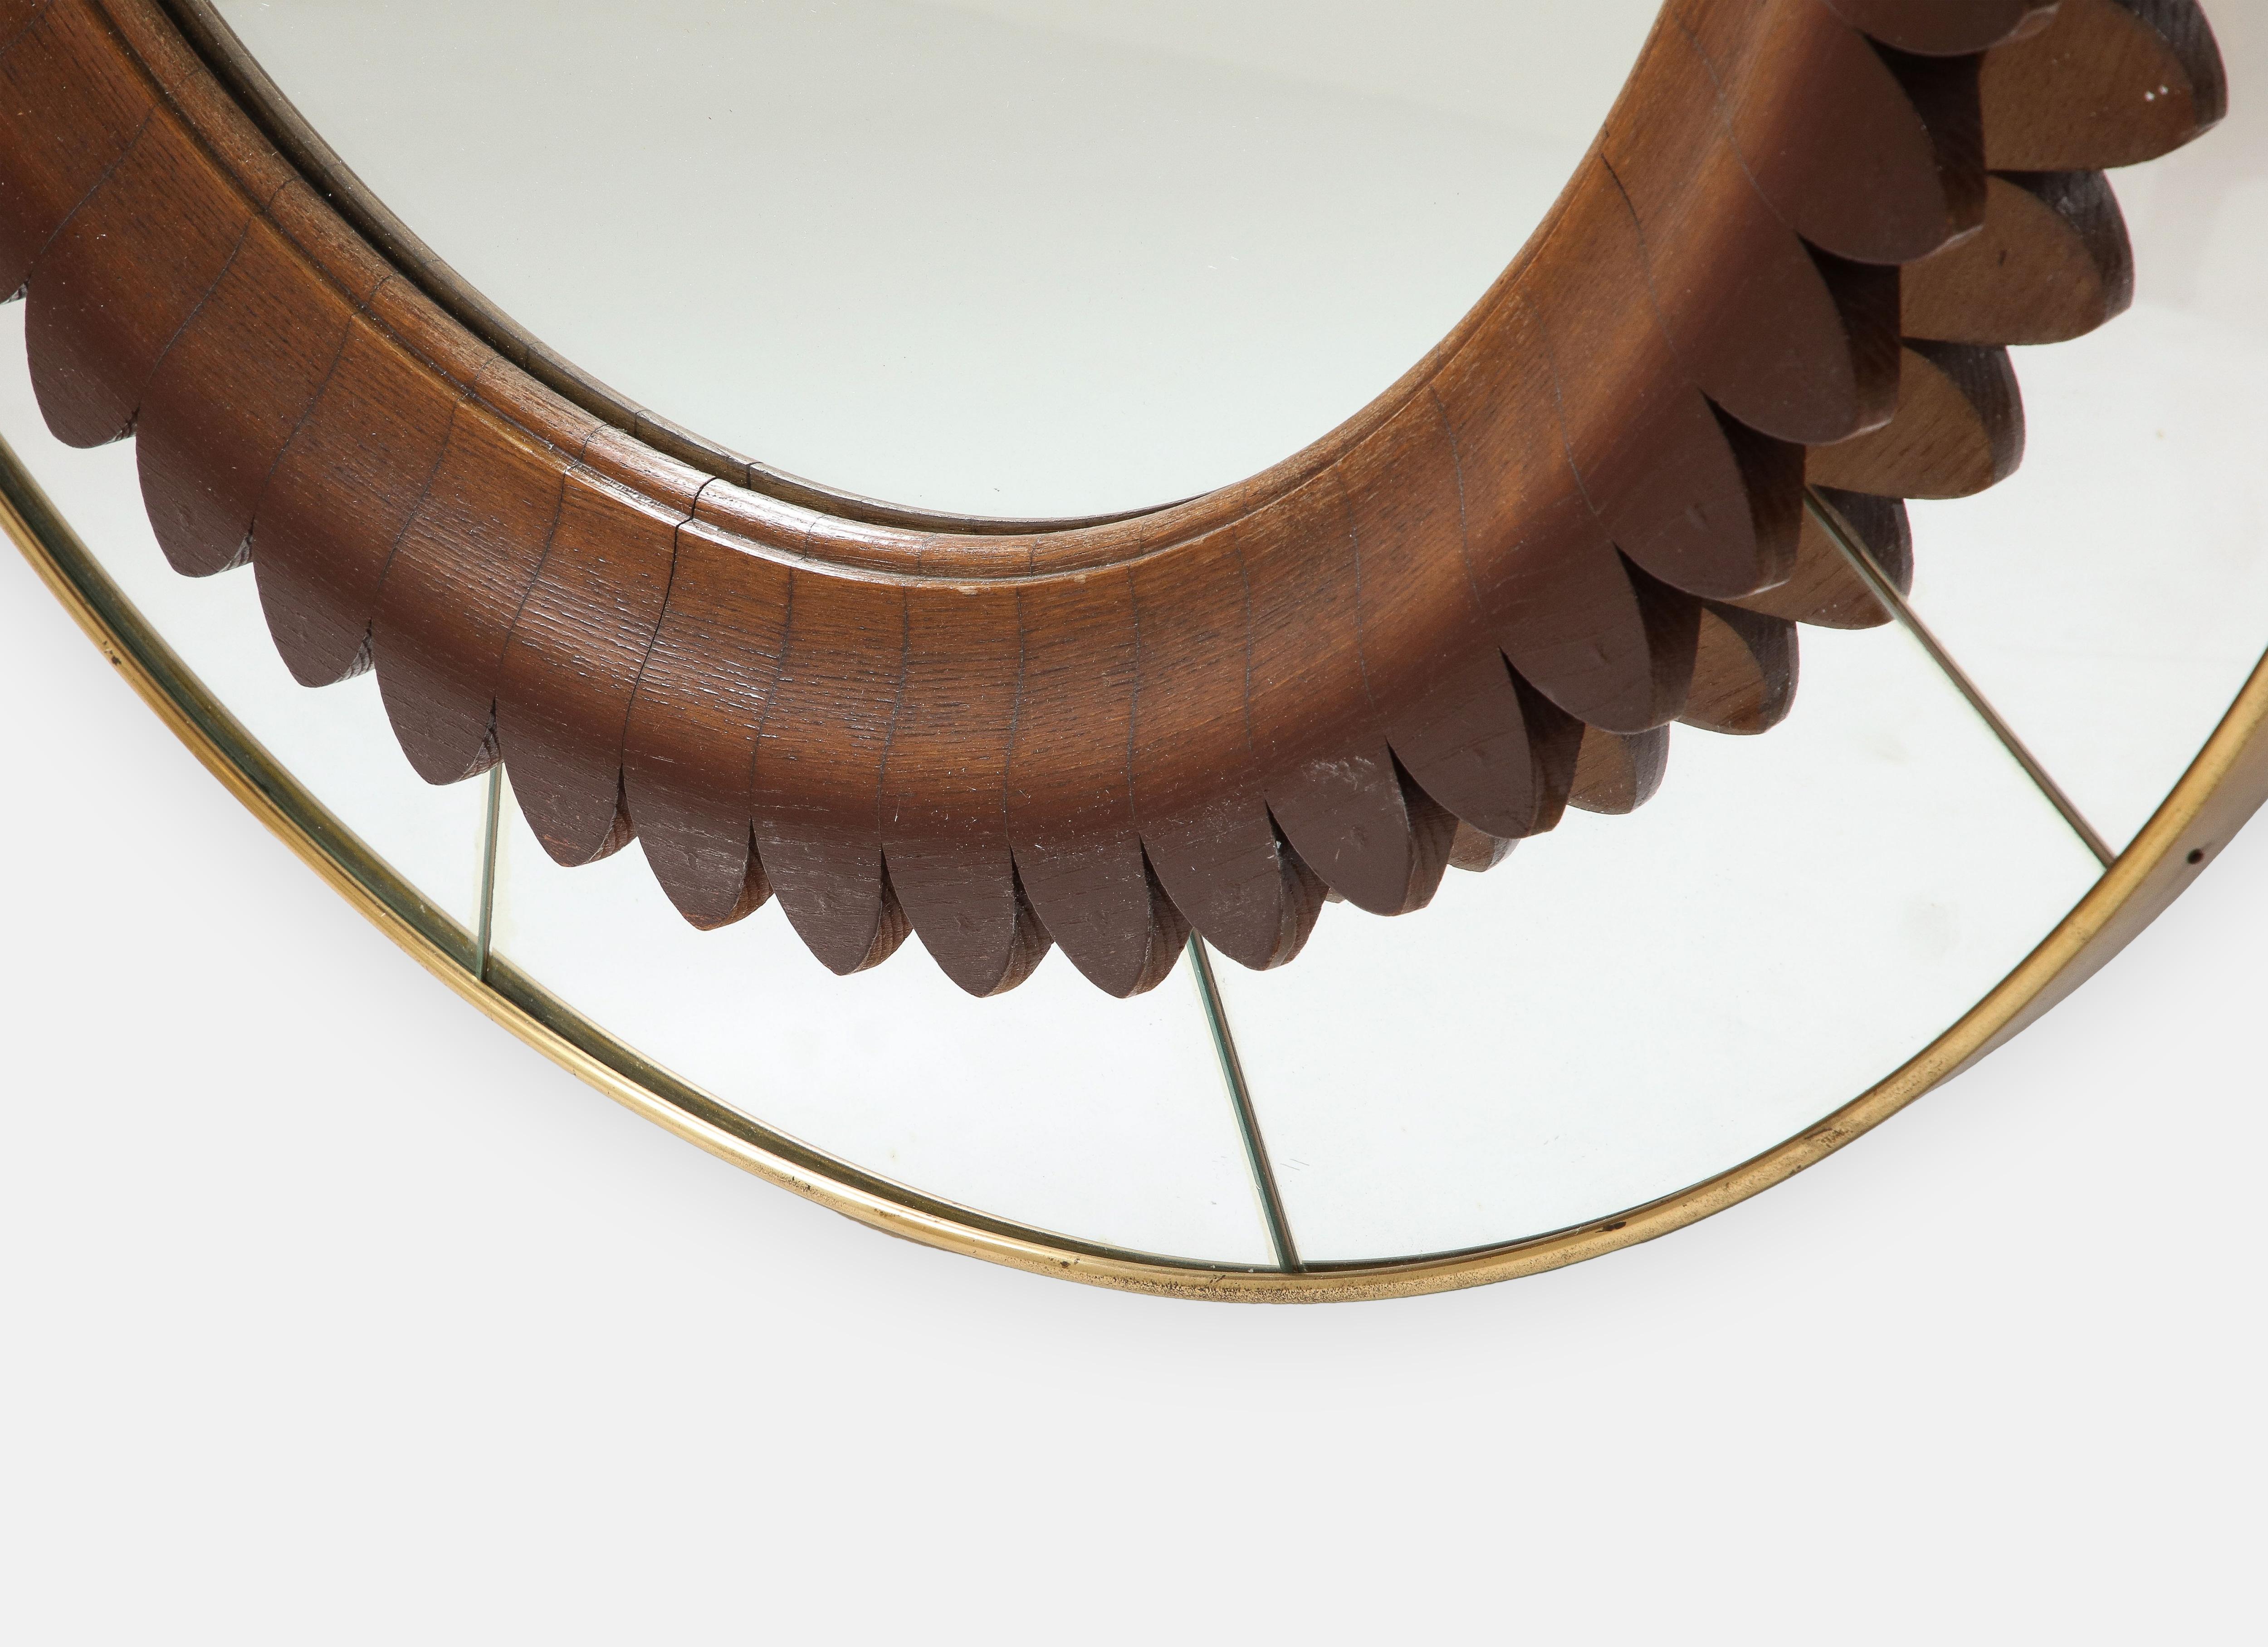 Fratelli Marelli Rare Round Carved Walnut and Brass Wall Mirror, Italy, 1950s For Sale 3